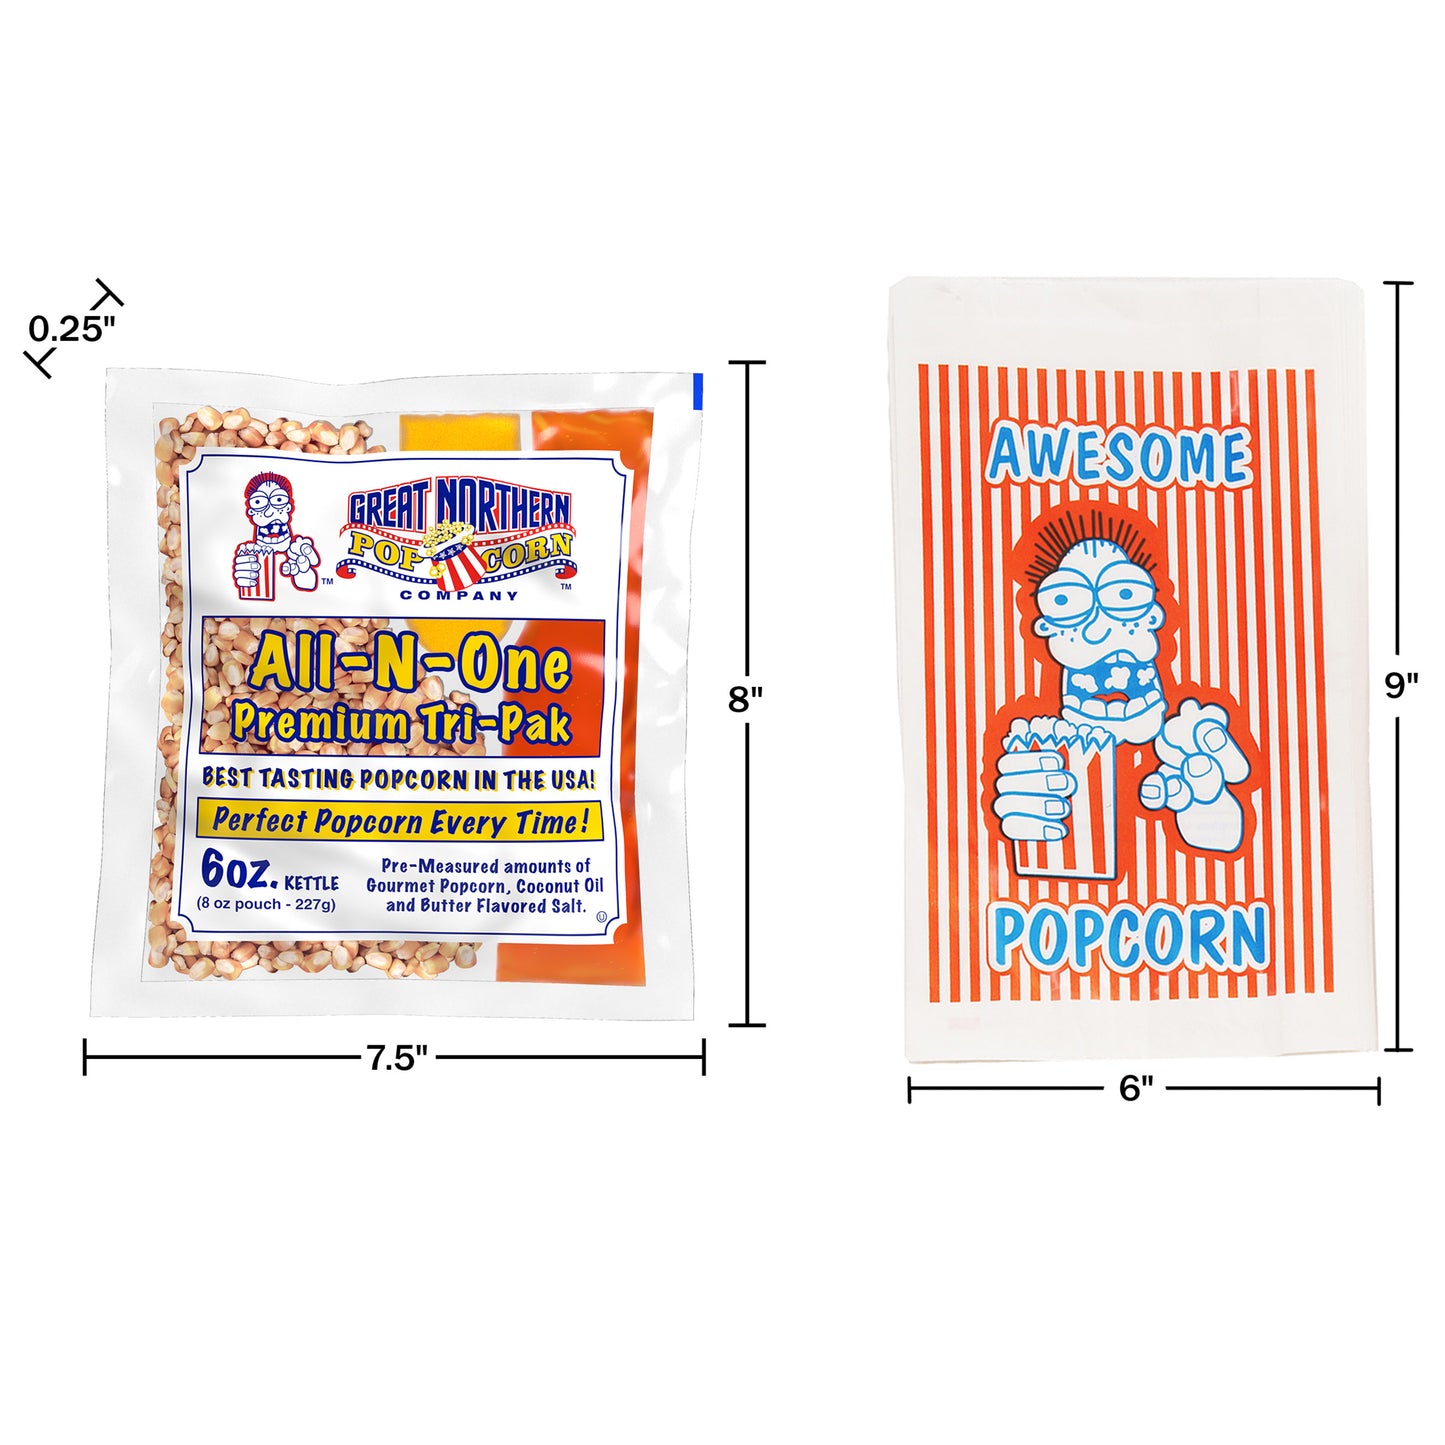 100 Popcorn Bags and 6 Ounce All-in-One Popcorn Packs  – Case of 12